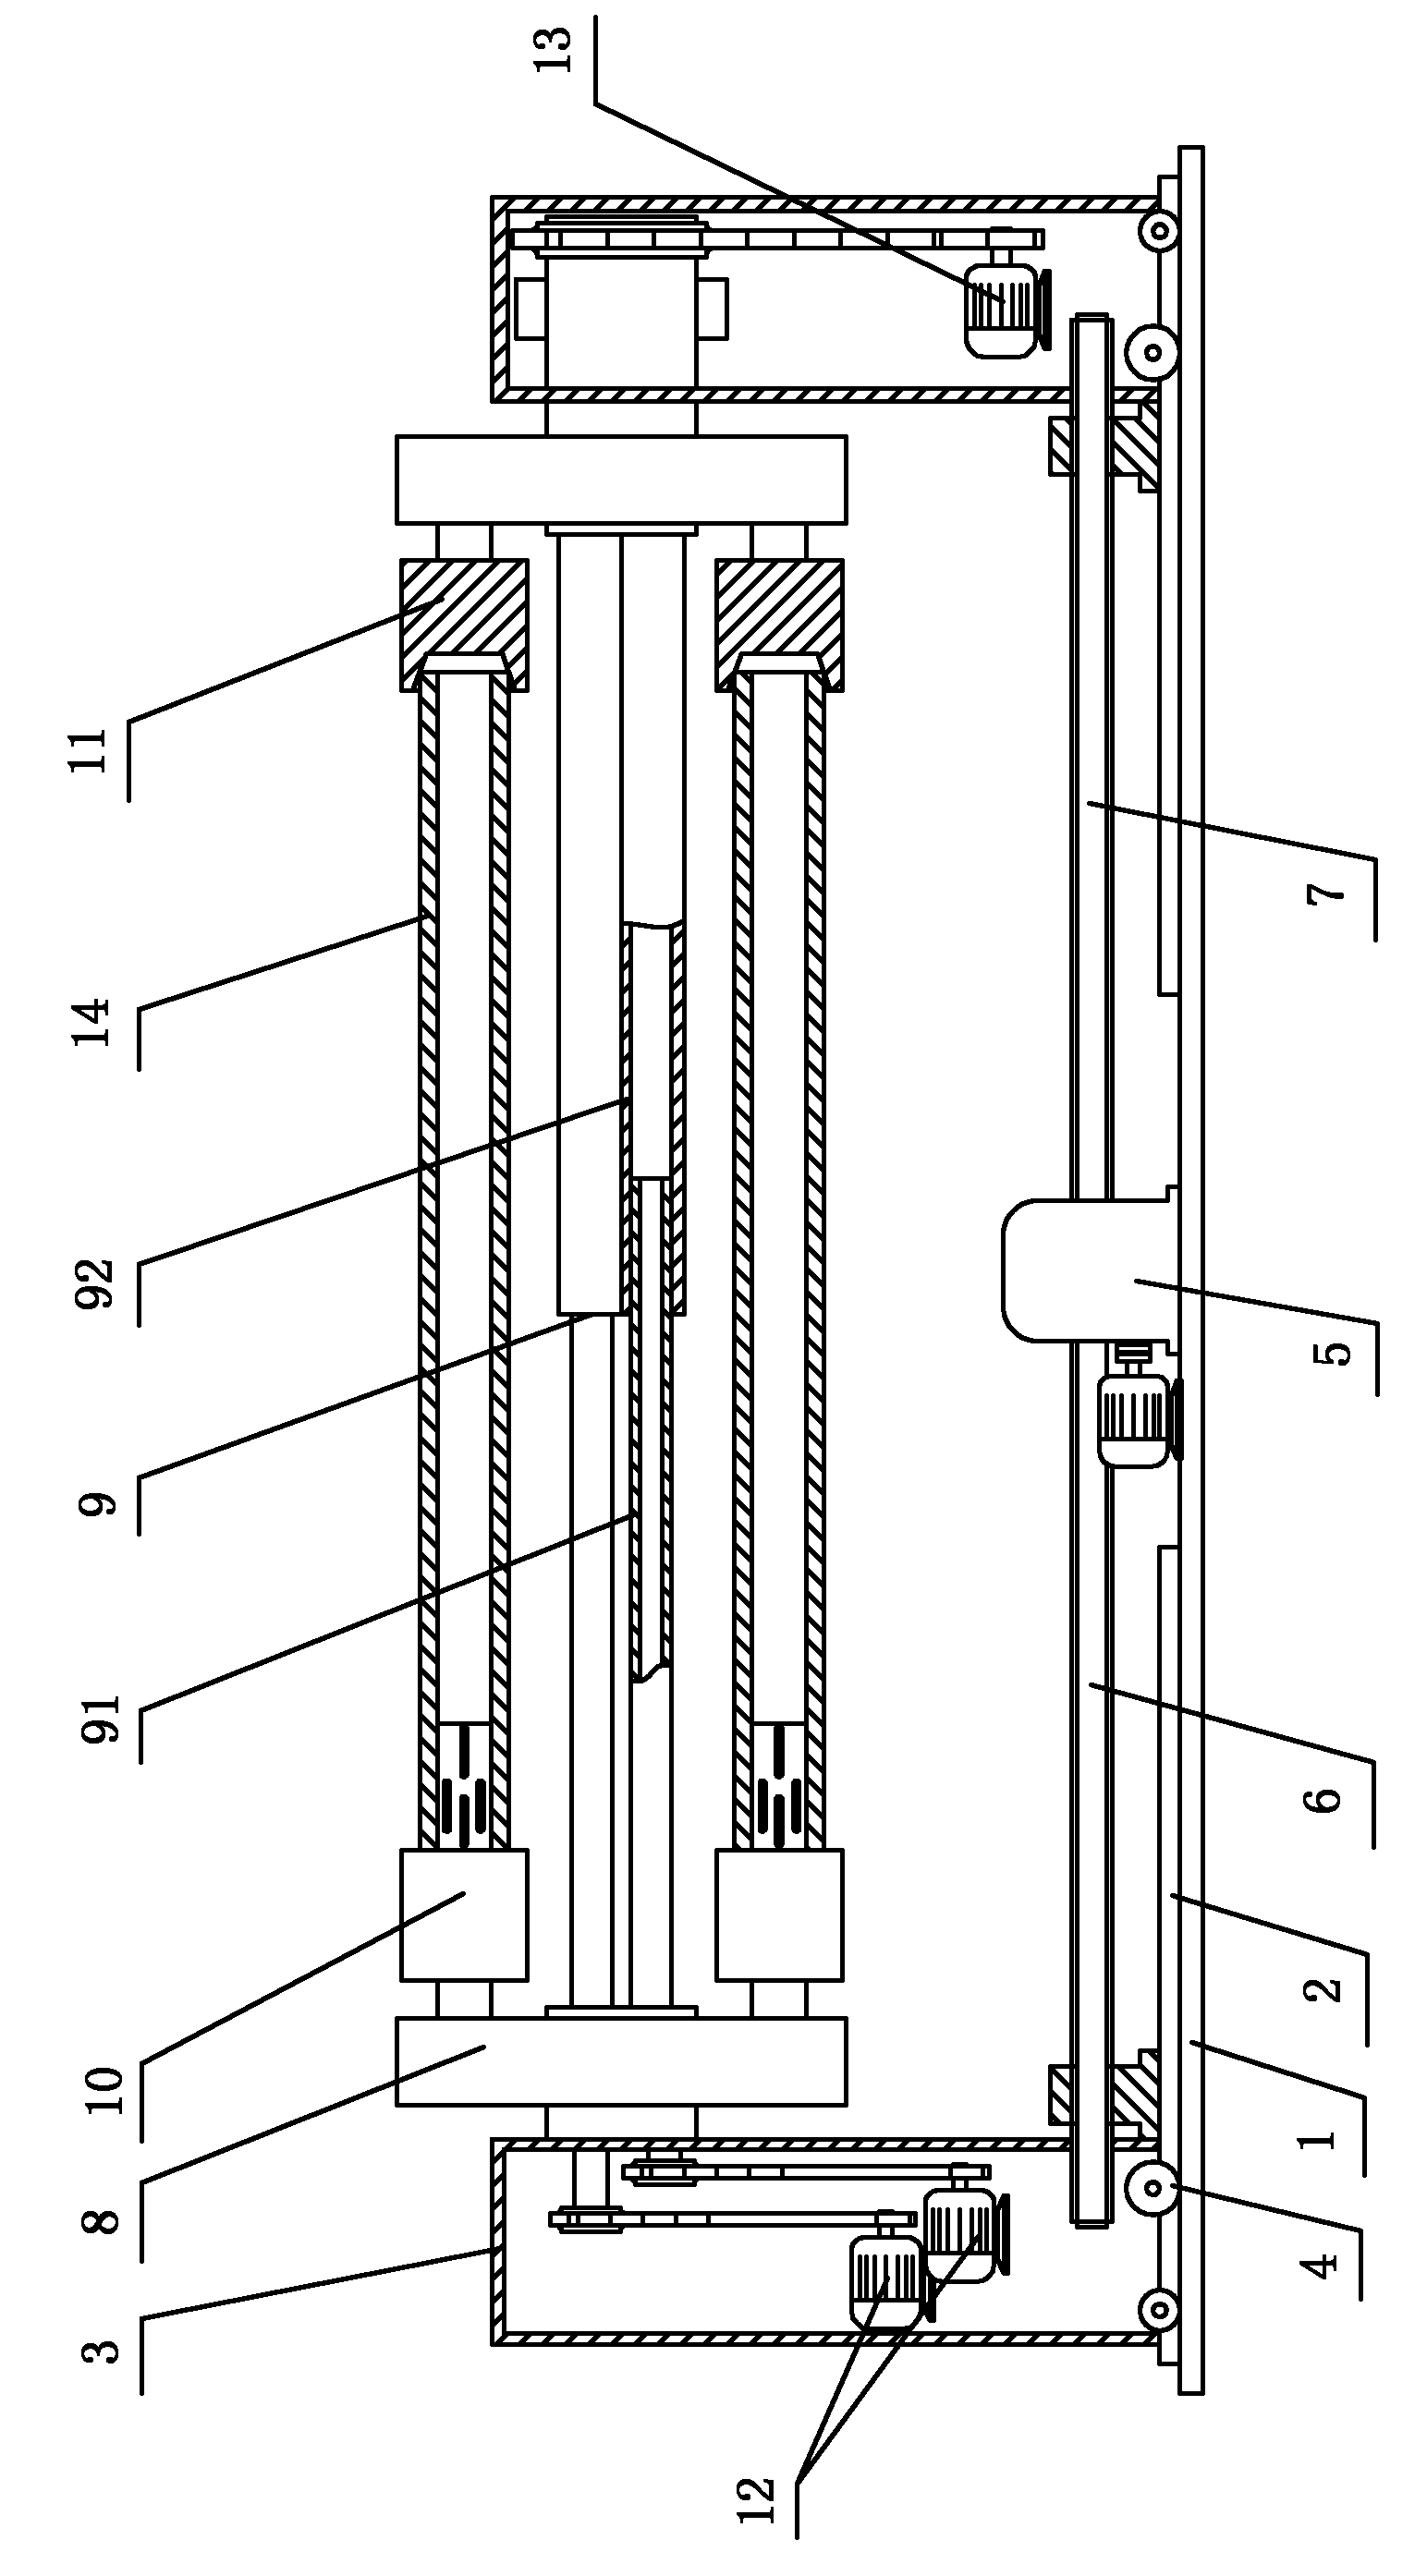 Free-open-close turnover shaft-less film winding device